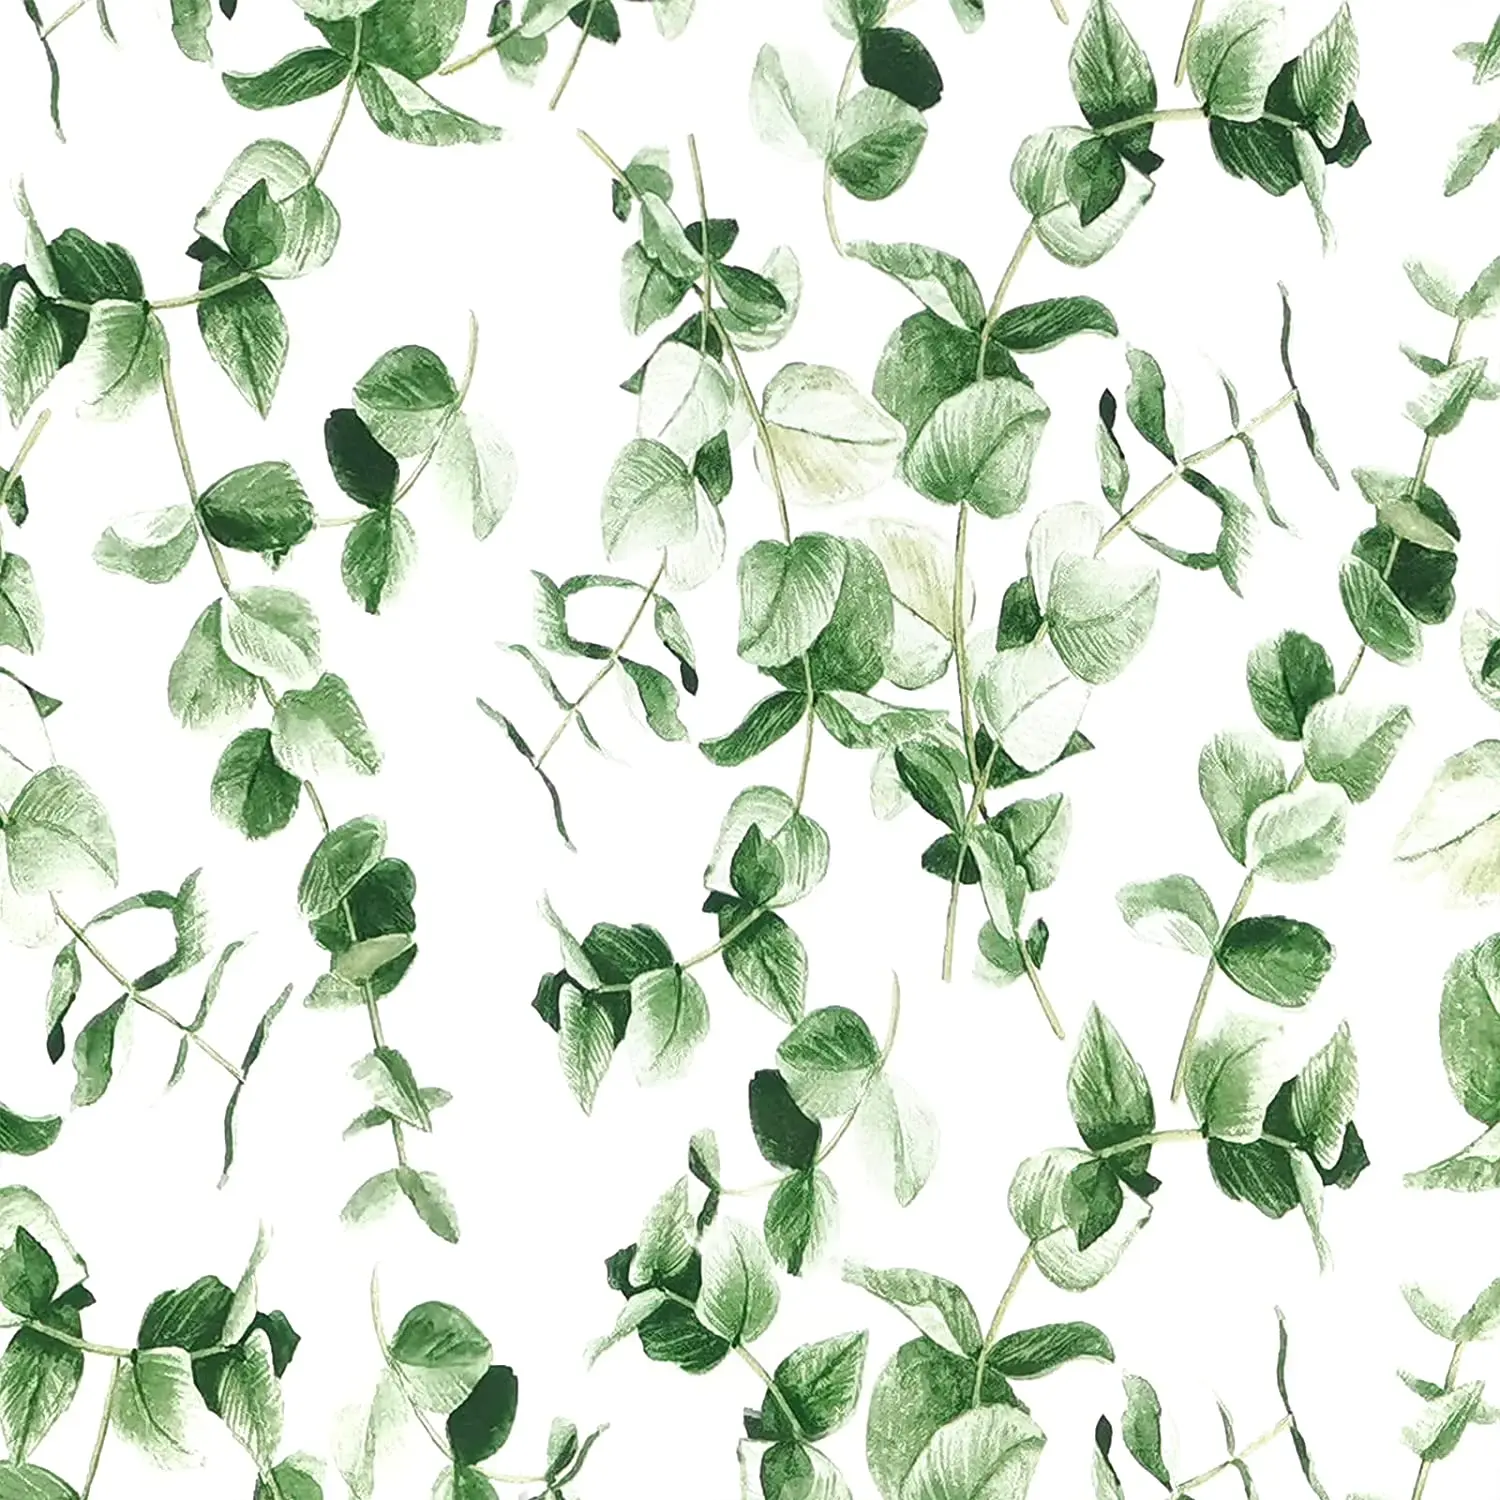 Green Leaf Wallpaper Peel And Stick Wallpaper Modern Leaves Contact Paper Self Adhesive Wallpaper For Bedroom Wall Decoration